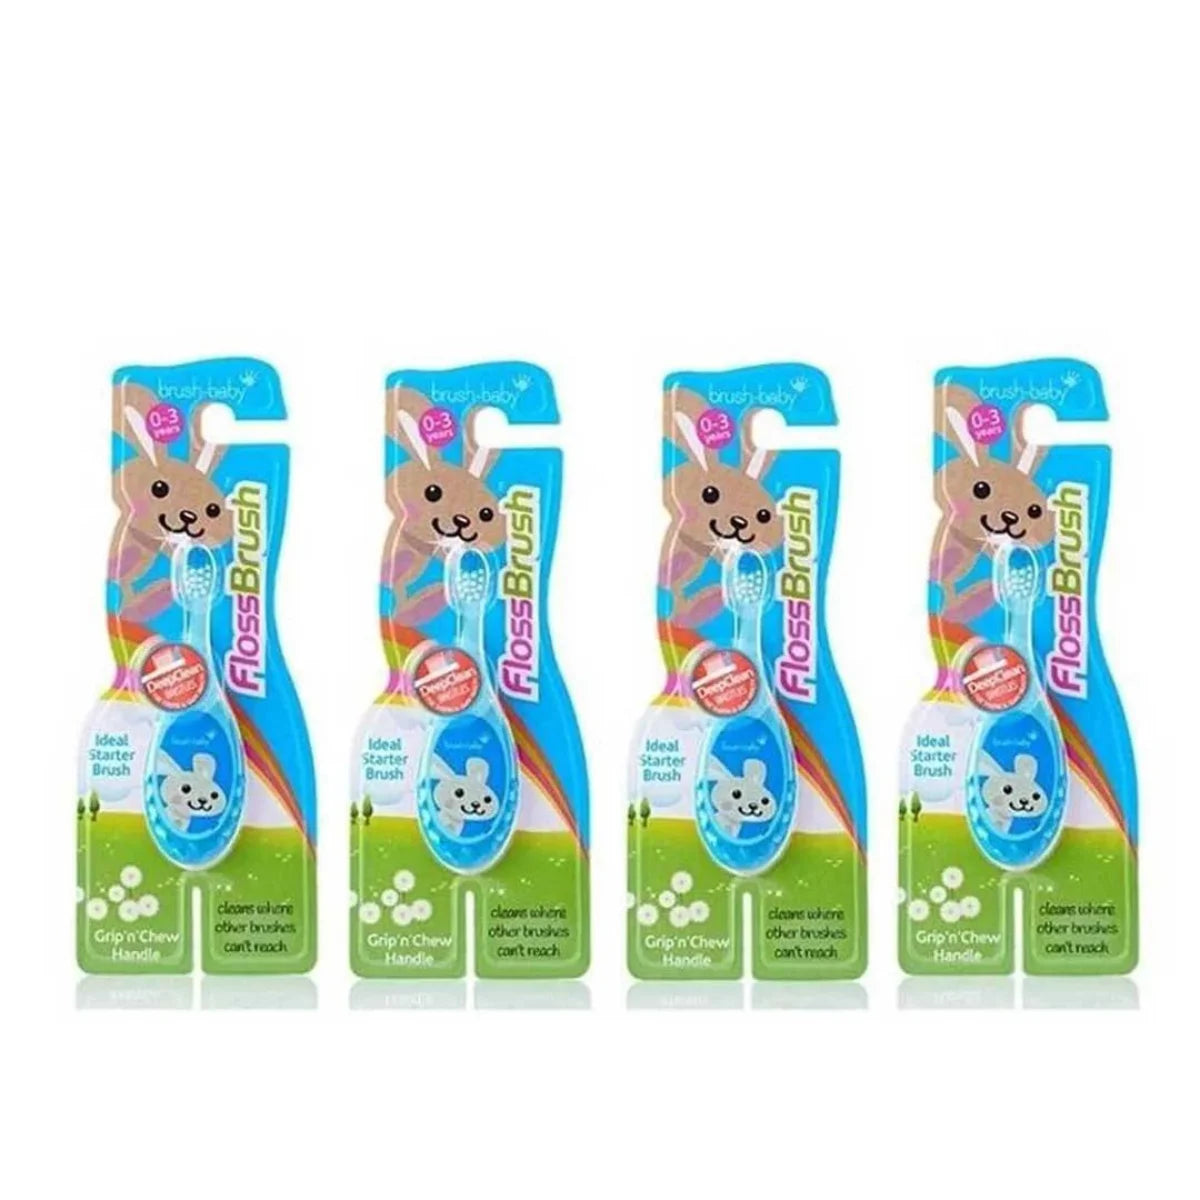 4 pack of blue grip and chew handle flossbrushes baby soft bristles toothbrush